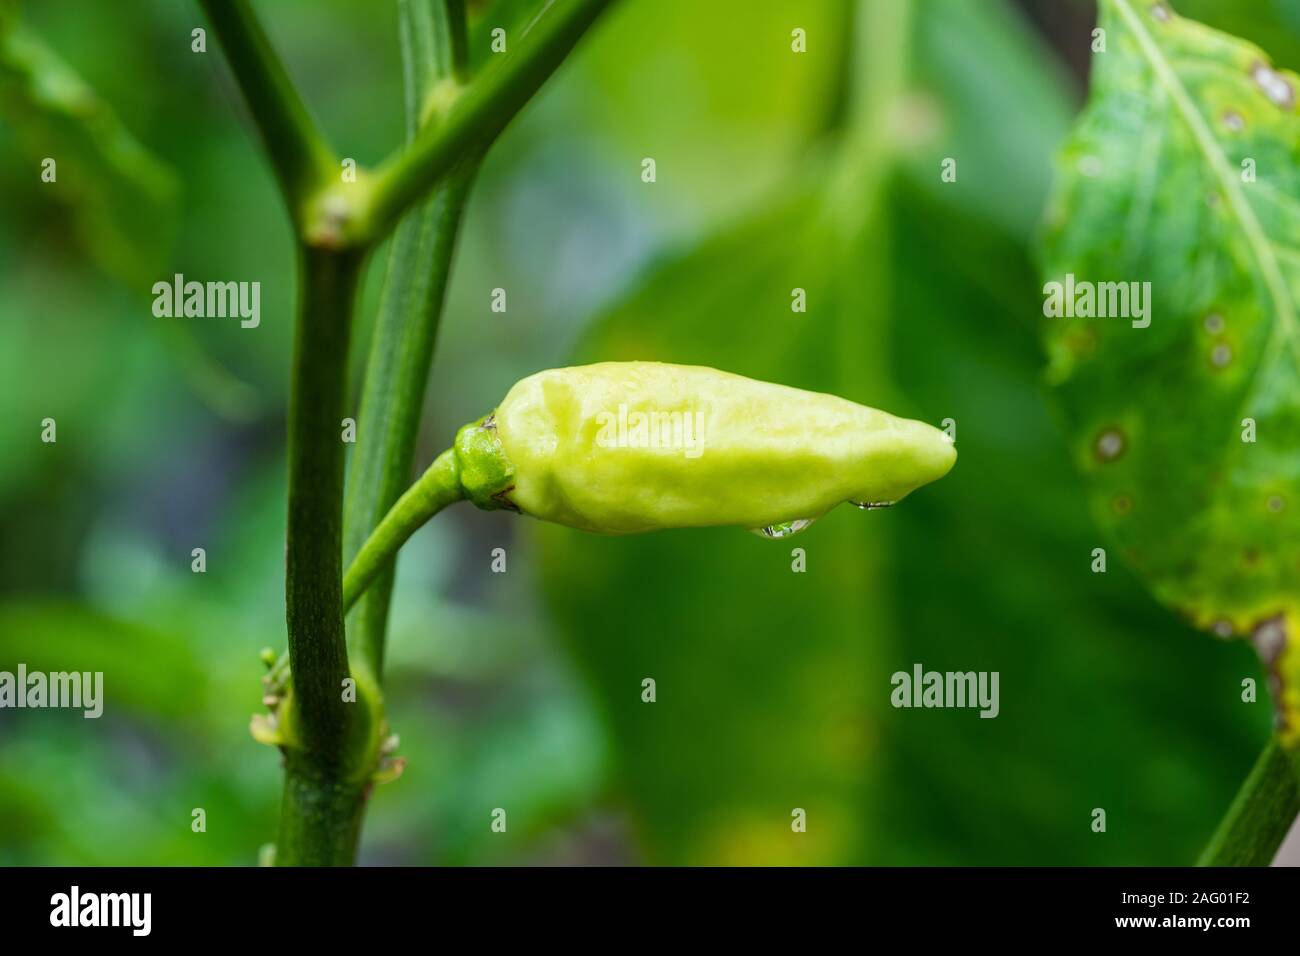 Tabasco pepper also known as Cabai rawit in Indonesia Stock Photo